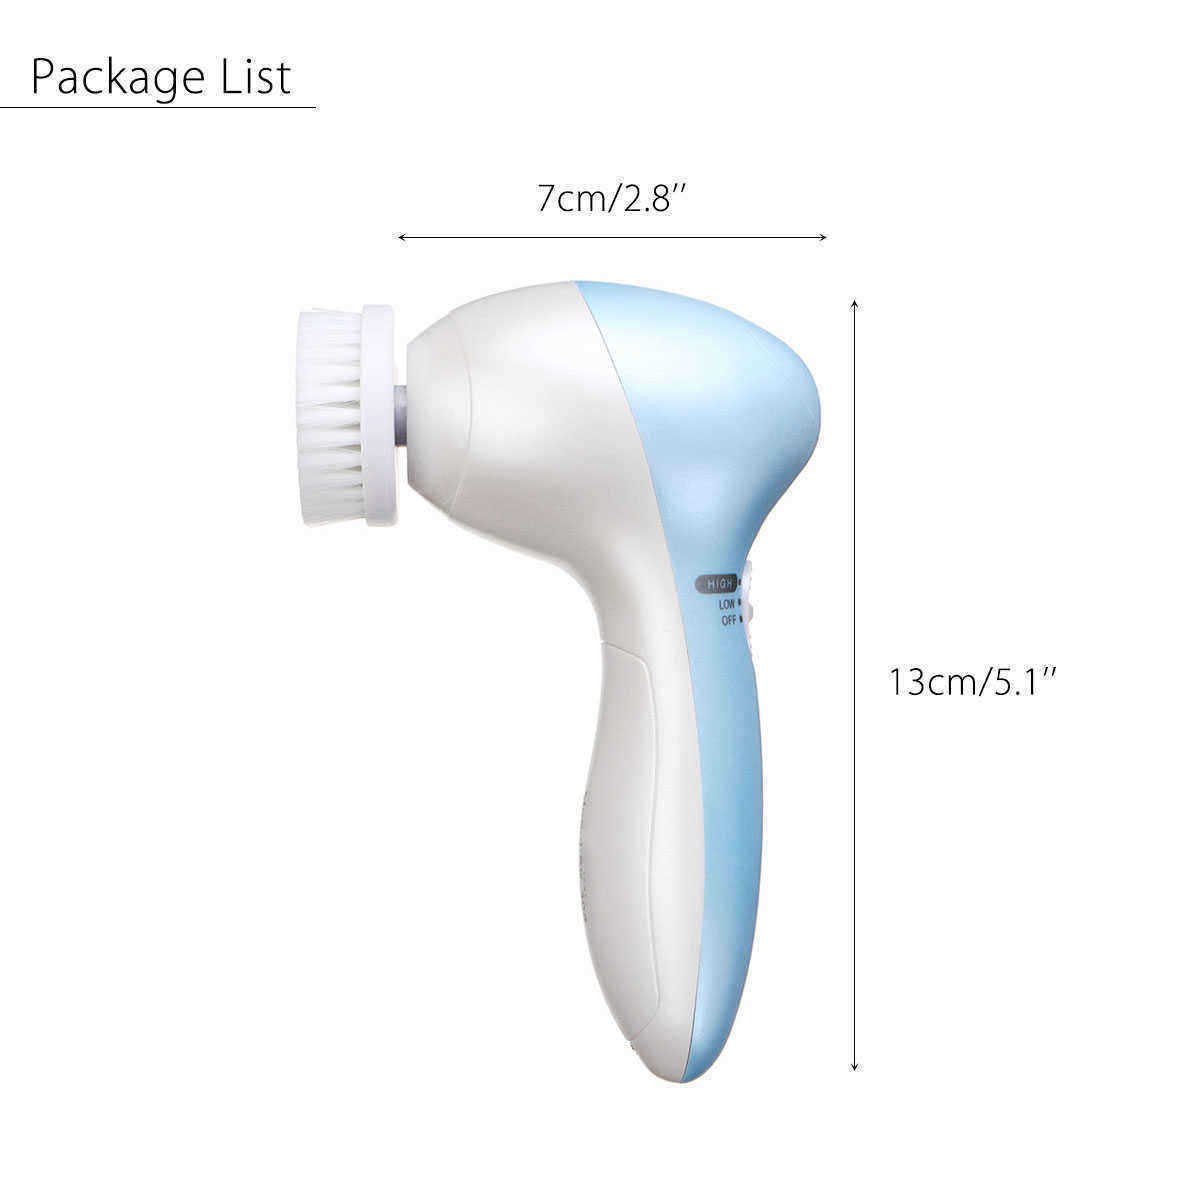 11-in1-Electric-Facial-Cleaner-Face-Brush-Cleansing-Massager-Skin-Care-Scrubber-1396974